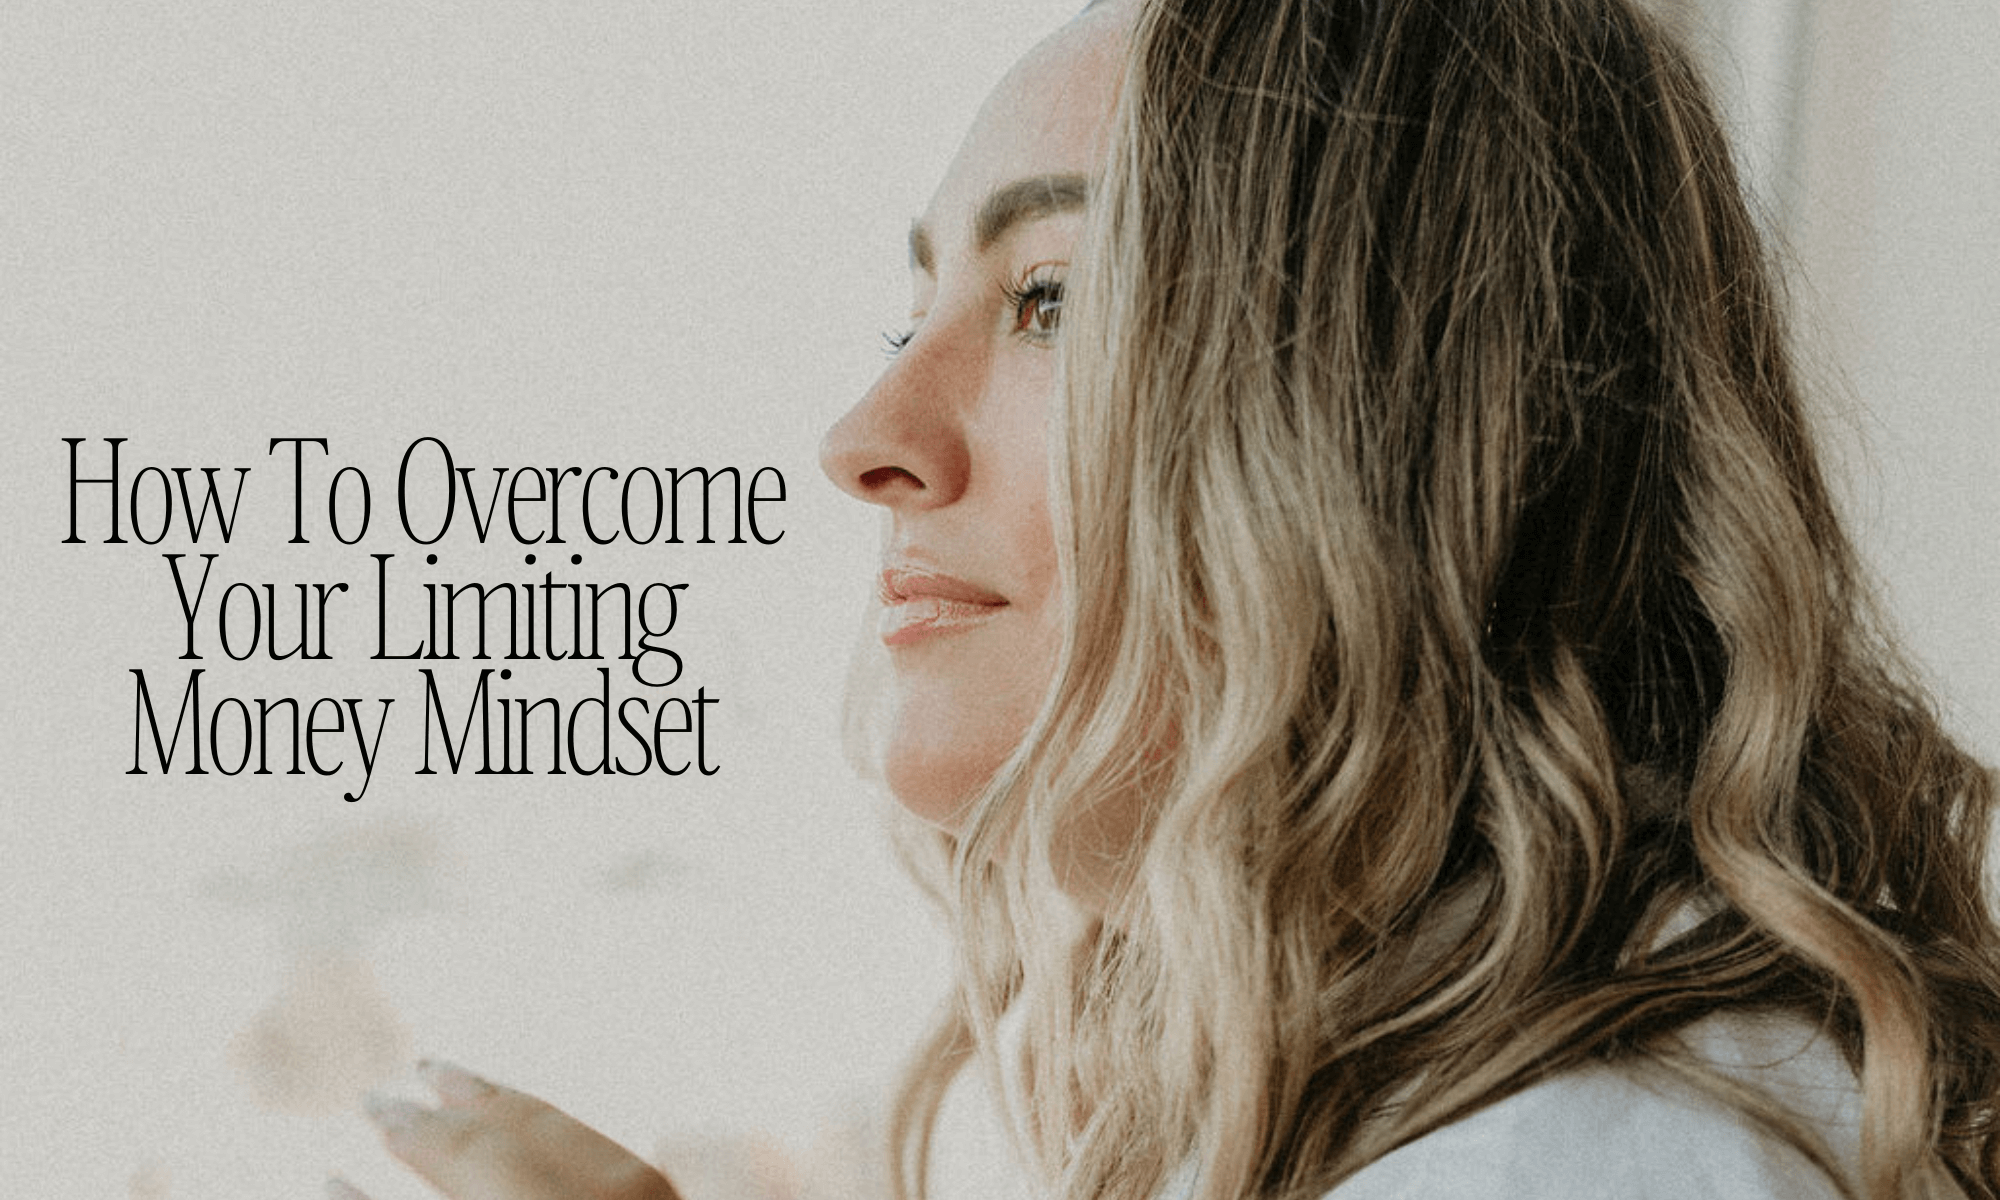 How To Overcome Your Limiting Money Mindset